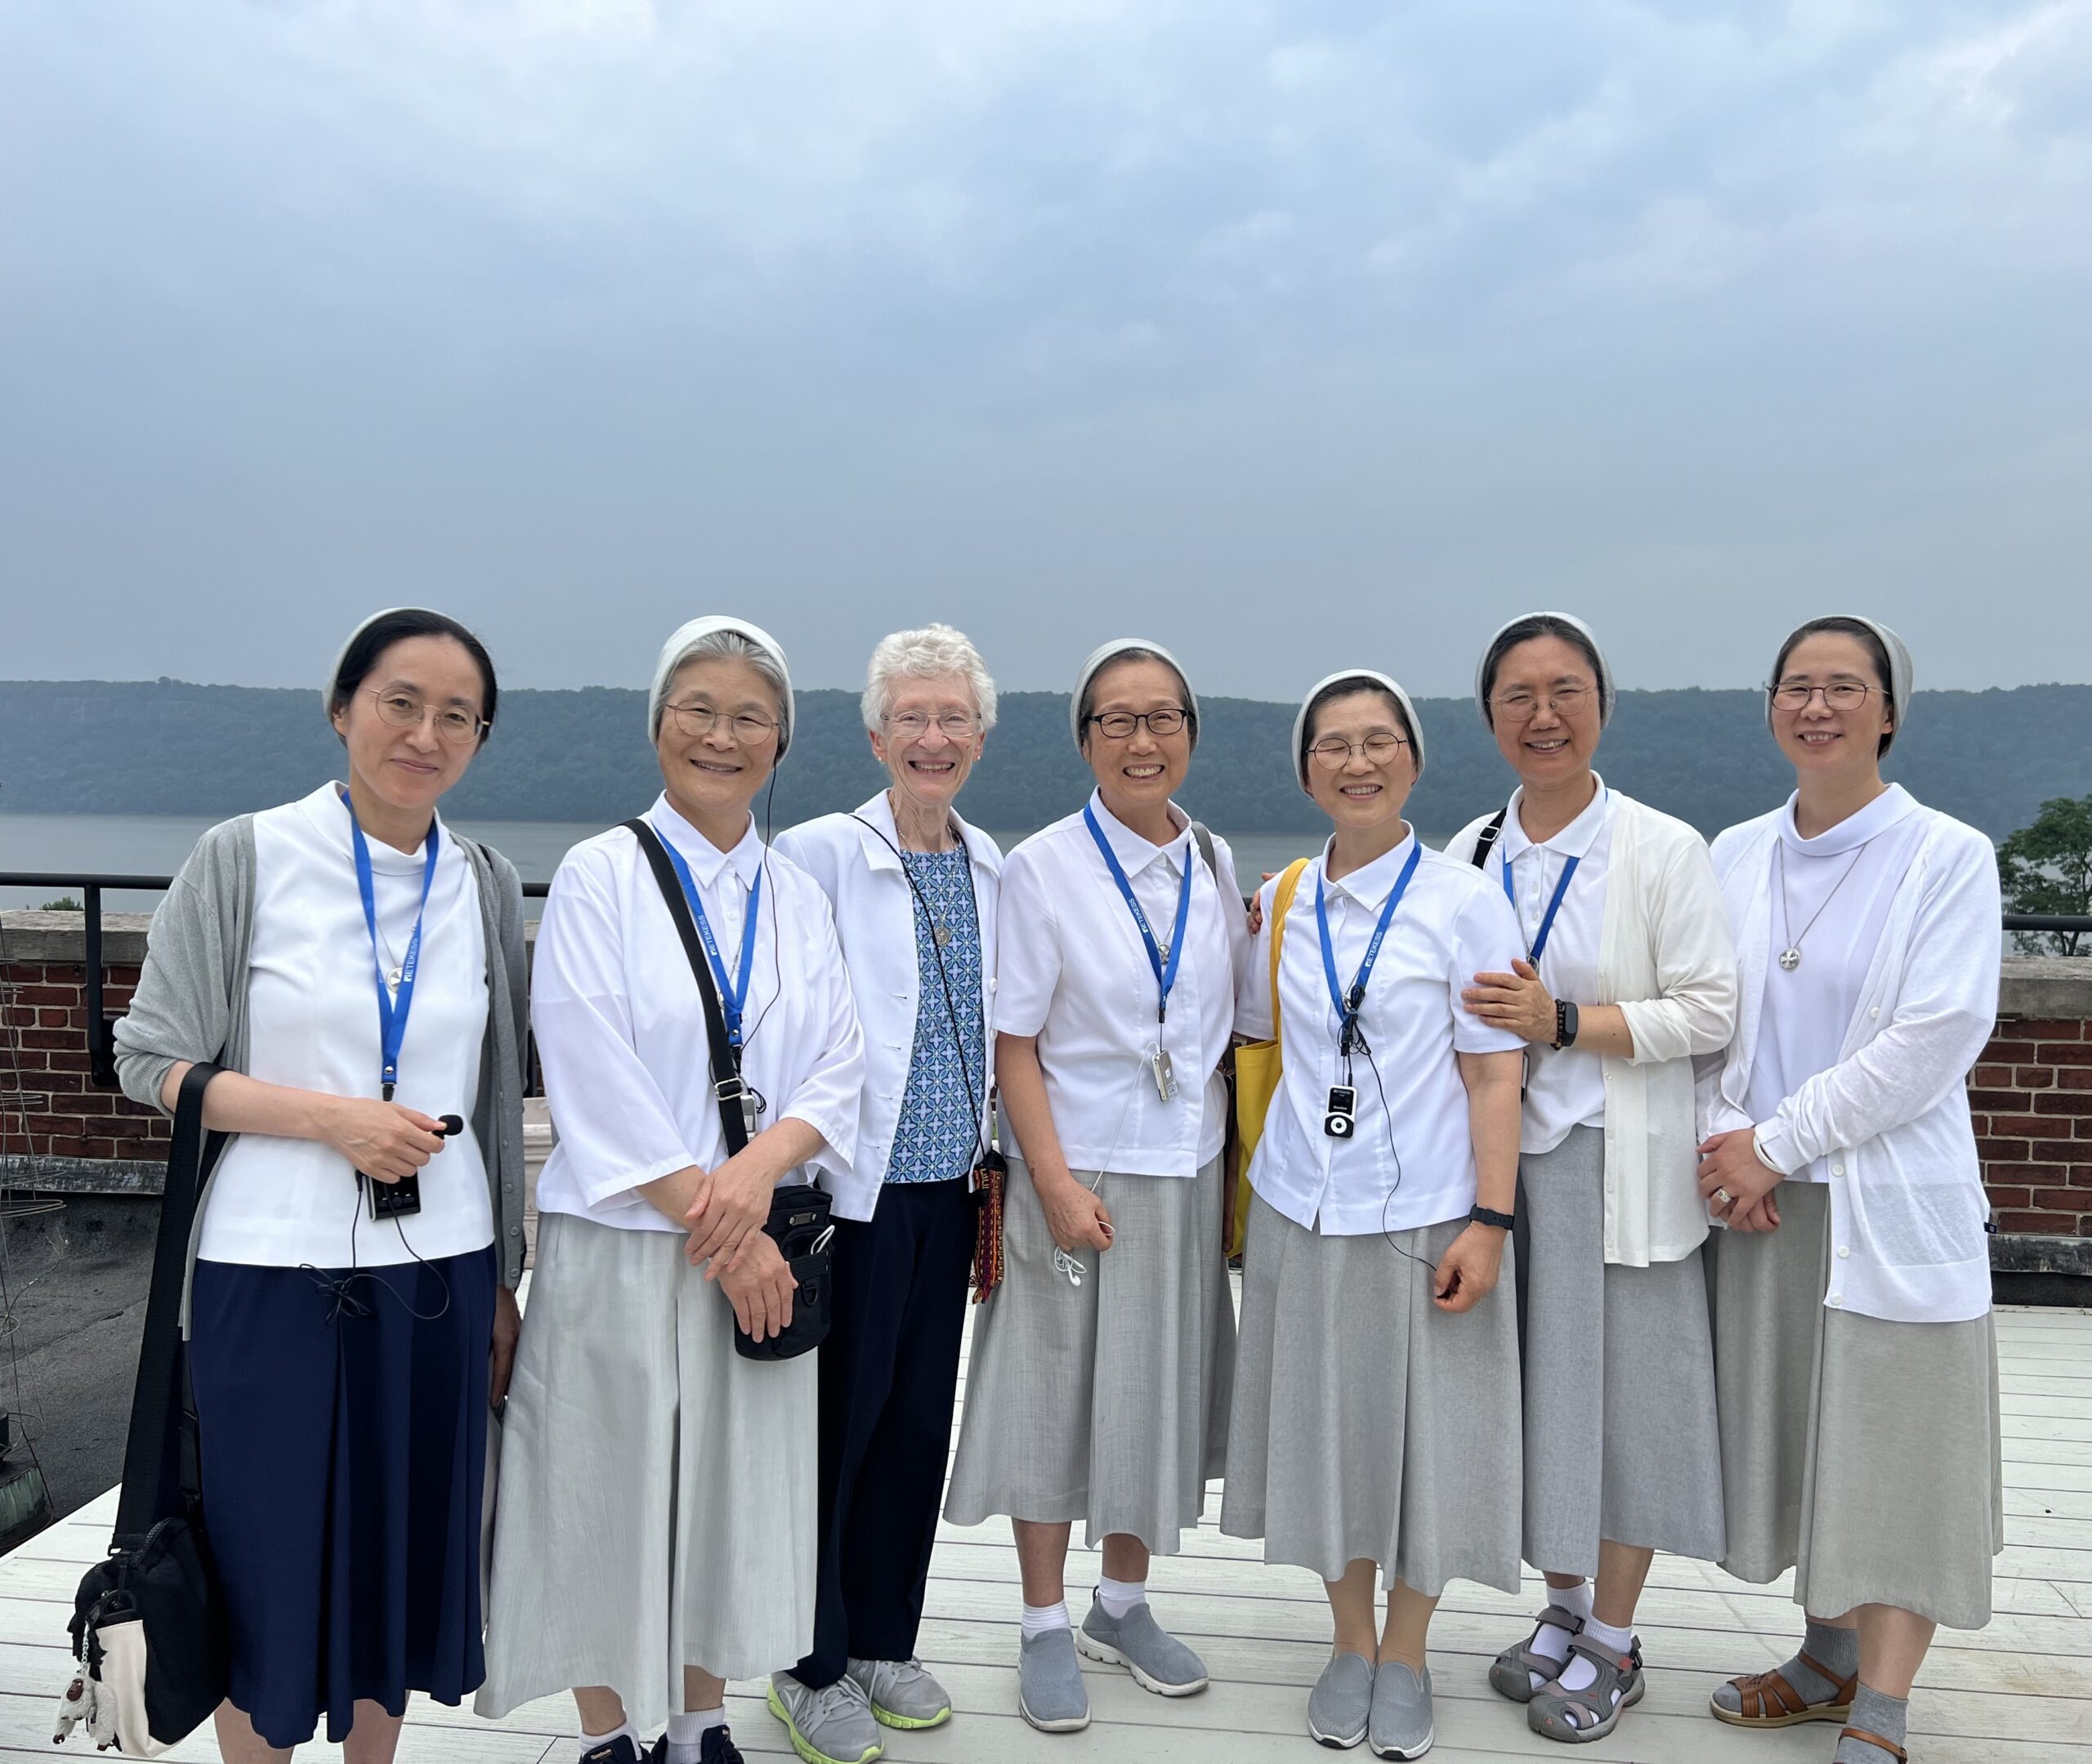 Sisters from the Korean Province of the Sisters of Charity of Seton Hill Visit SCNY